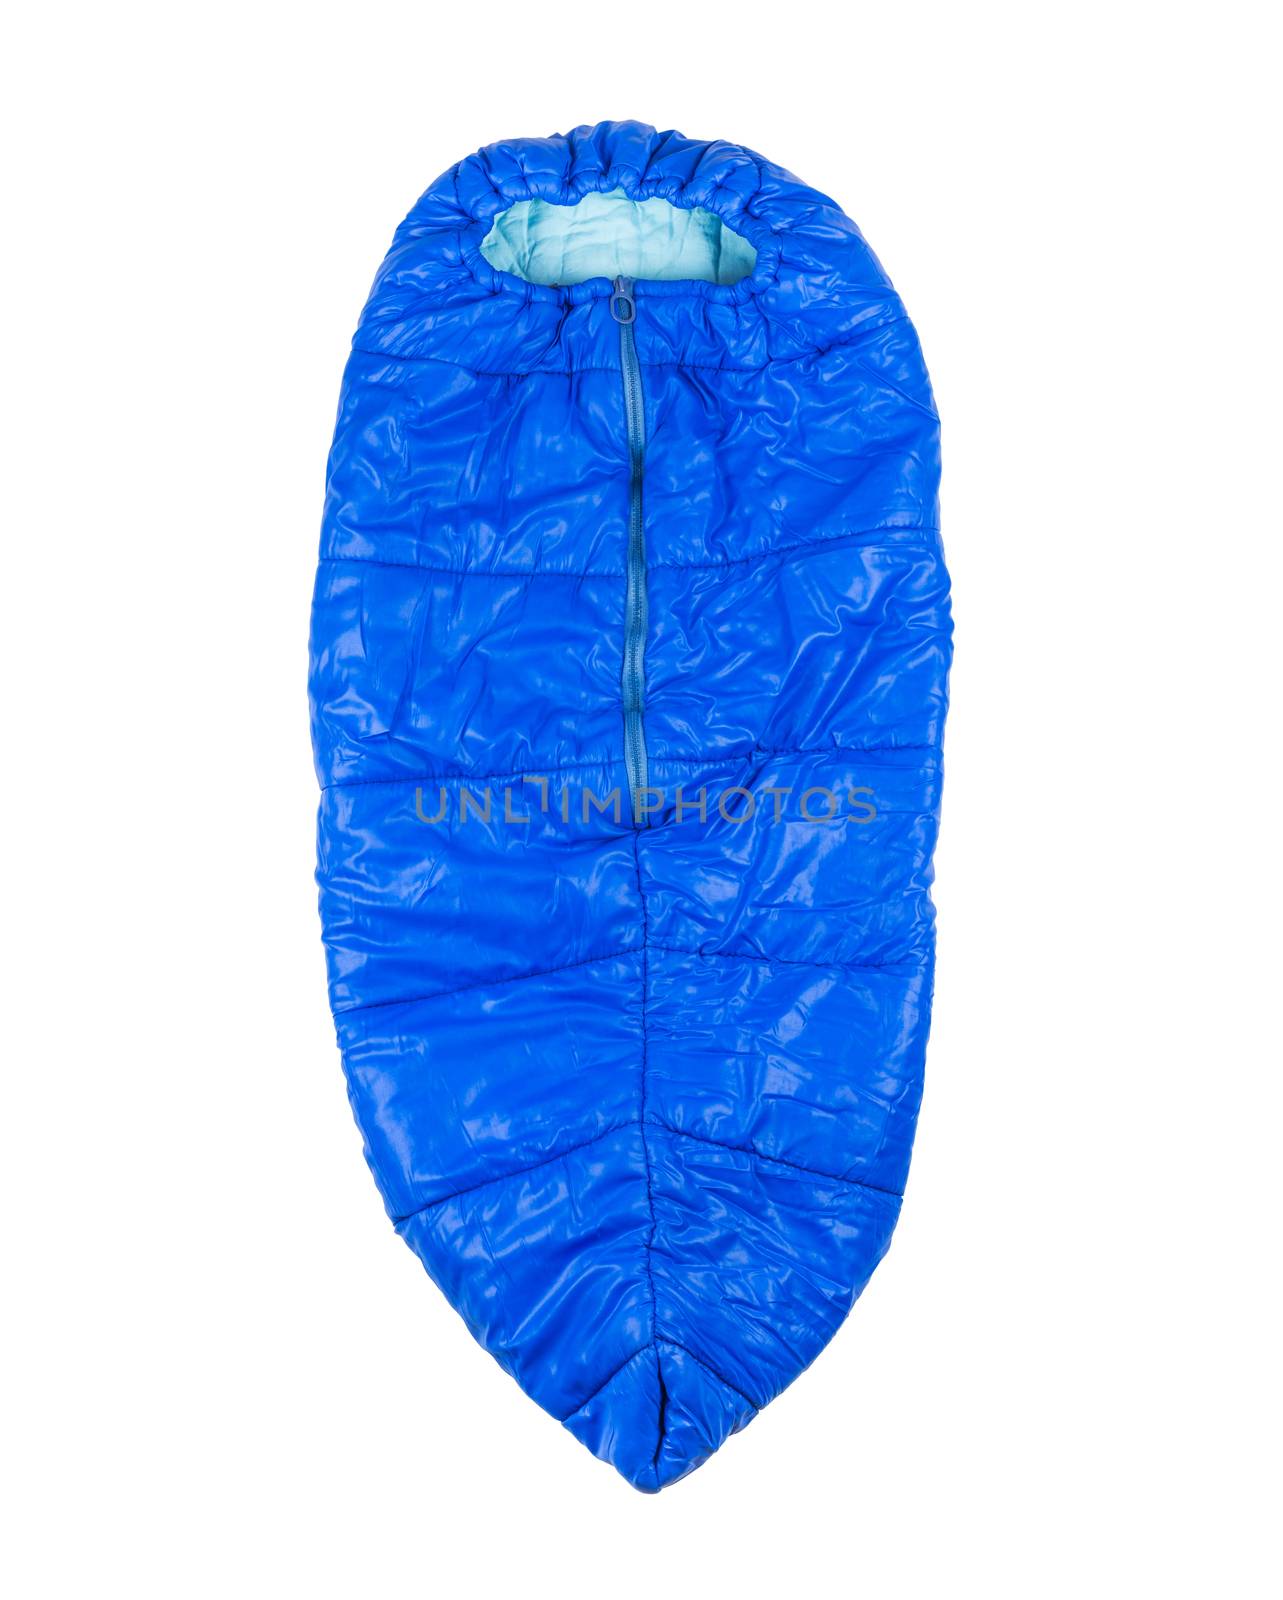 Blue Children's sleeping bag for camping, hiking, traveling isolated on white background